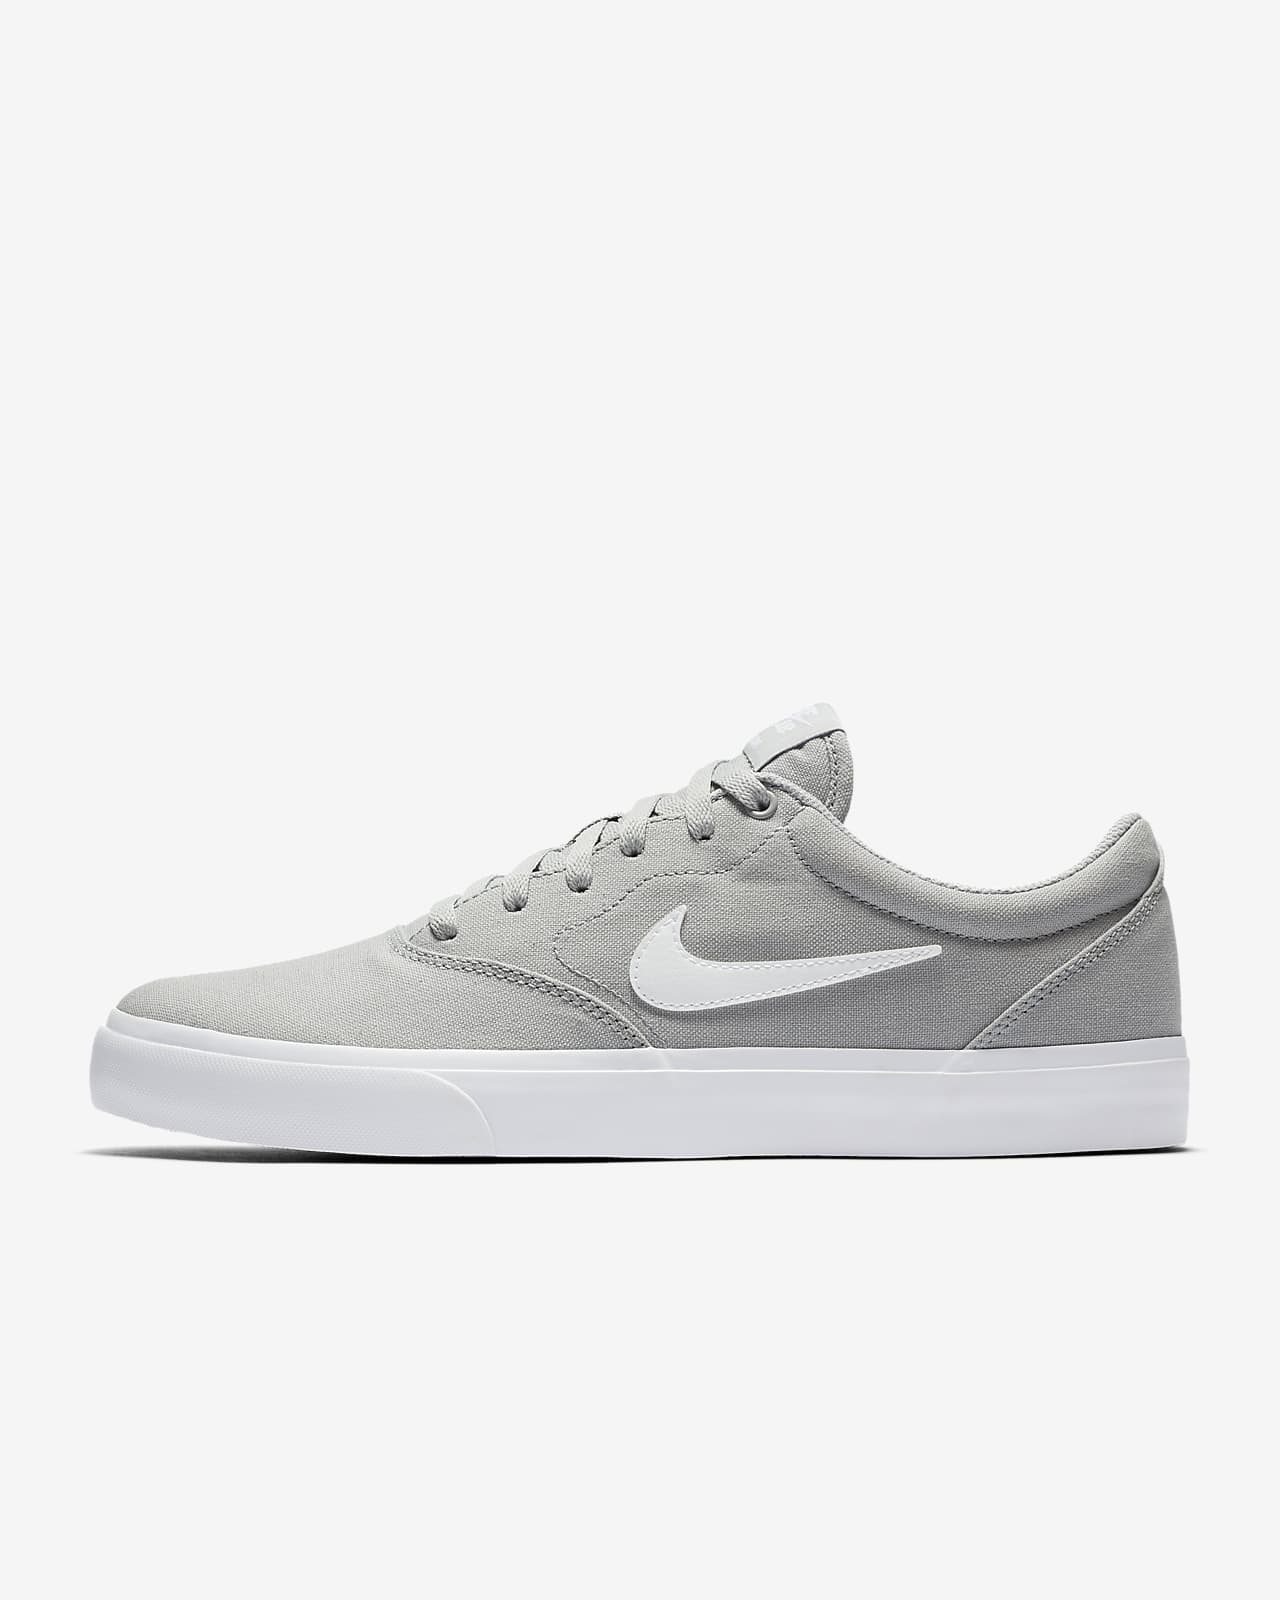 nike sb charge canvas men's shoes